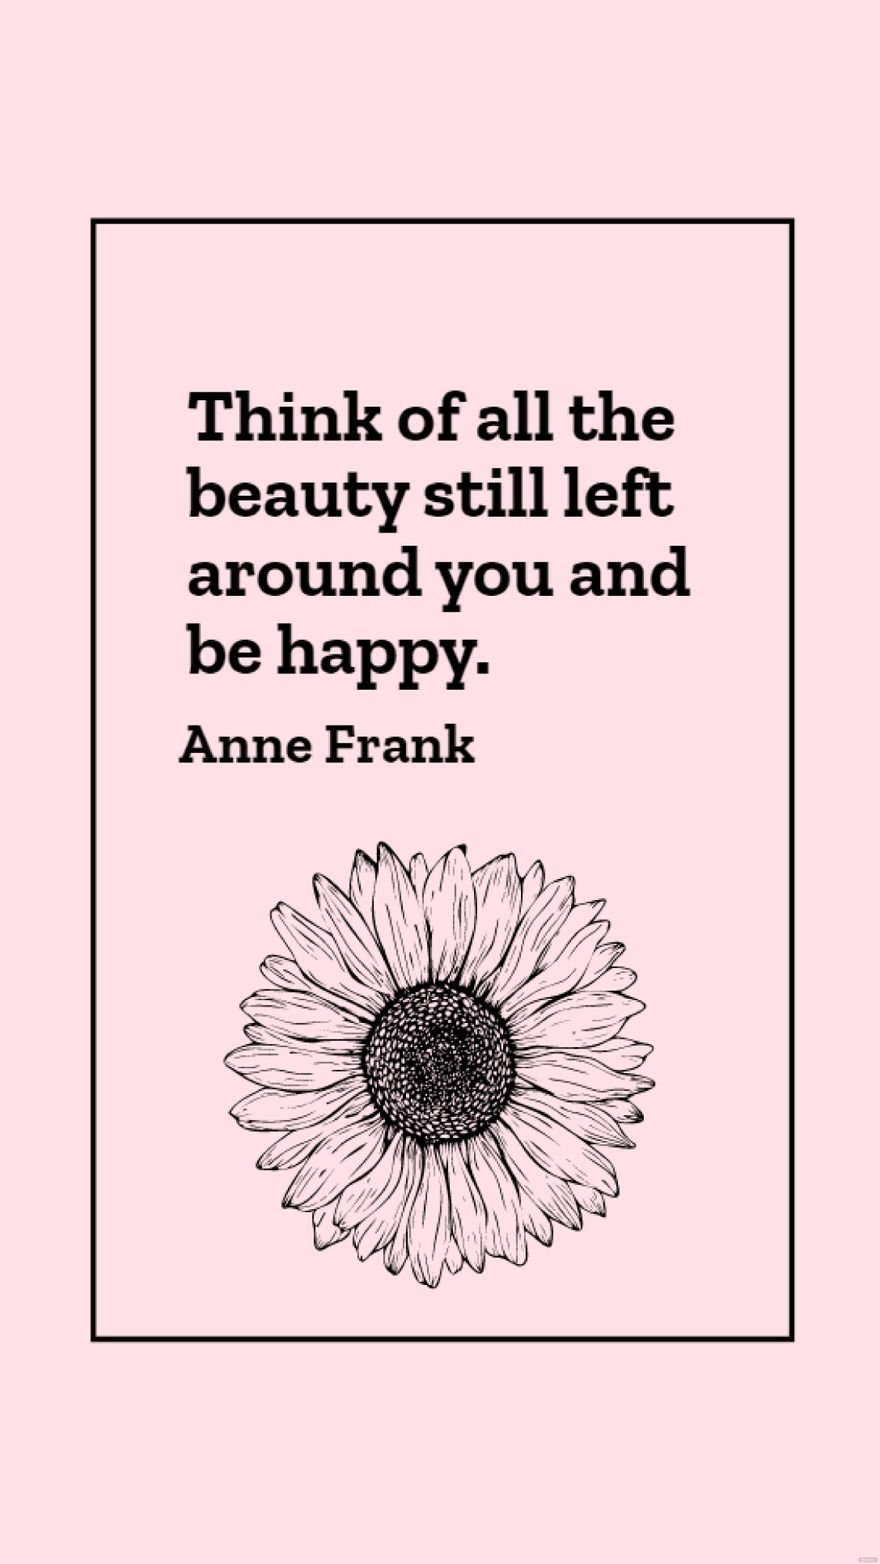 Anne Frank - Think of all the beauty still left around you and be happy.